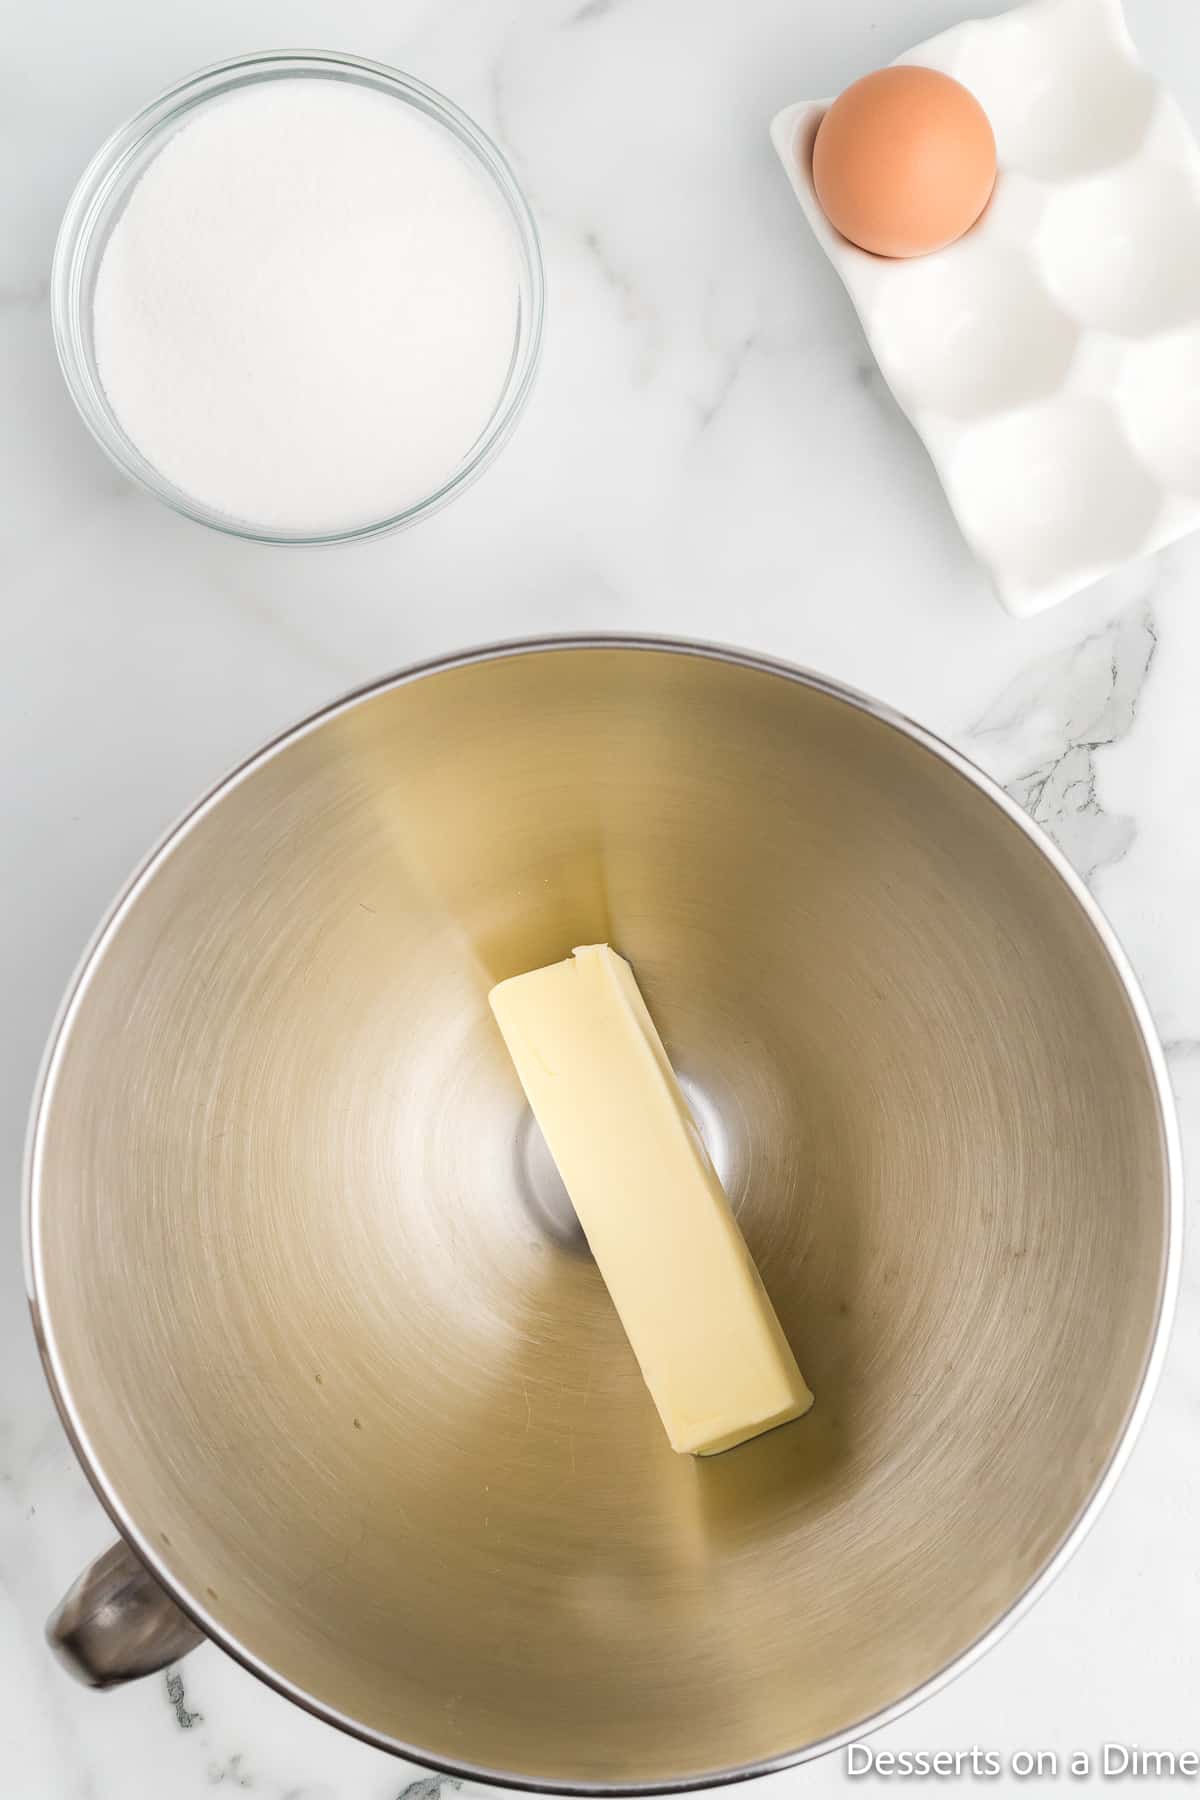 Stick of butter in a bowl with a bowl of sugar and one egg in a carton